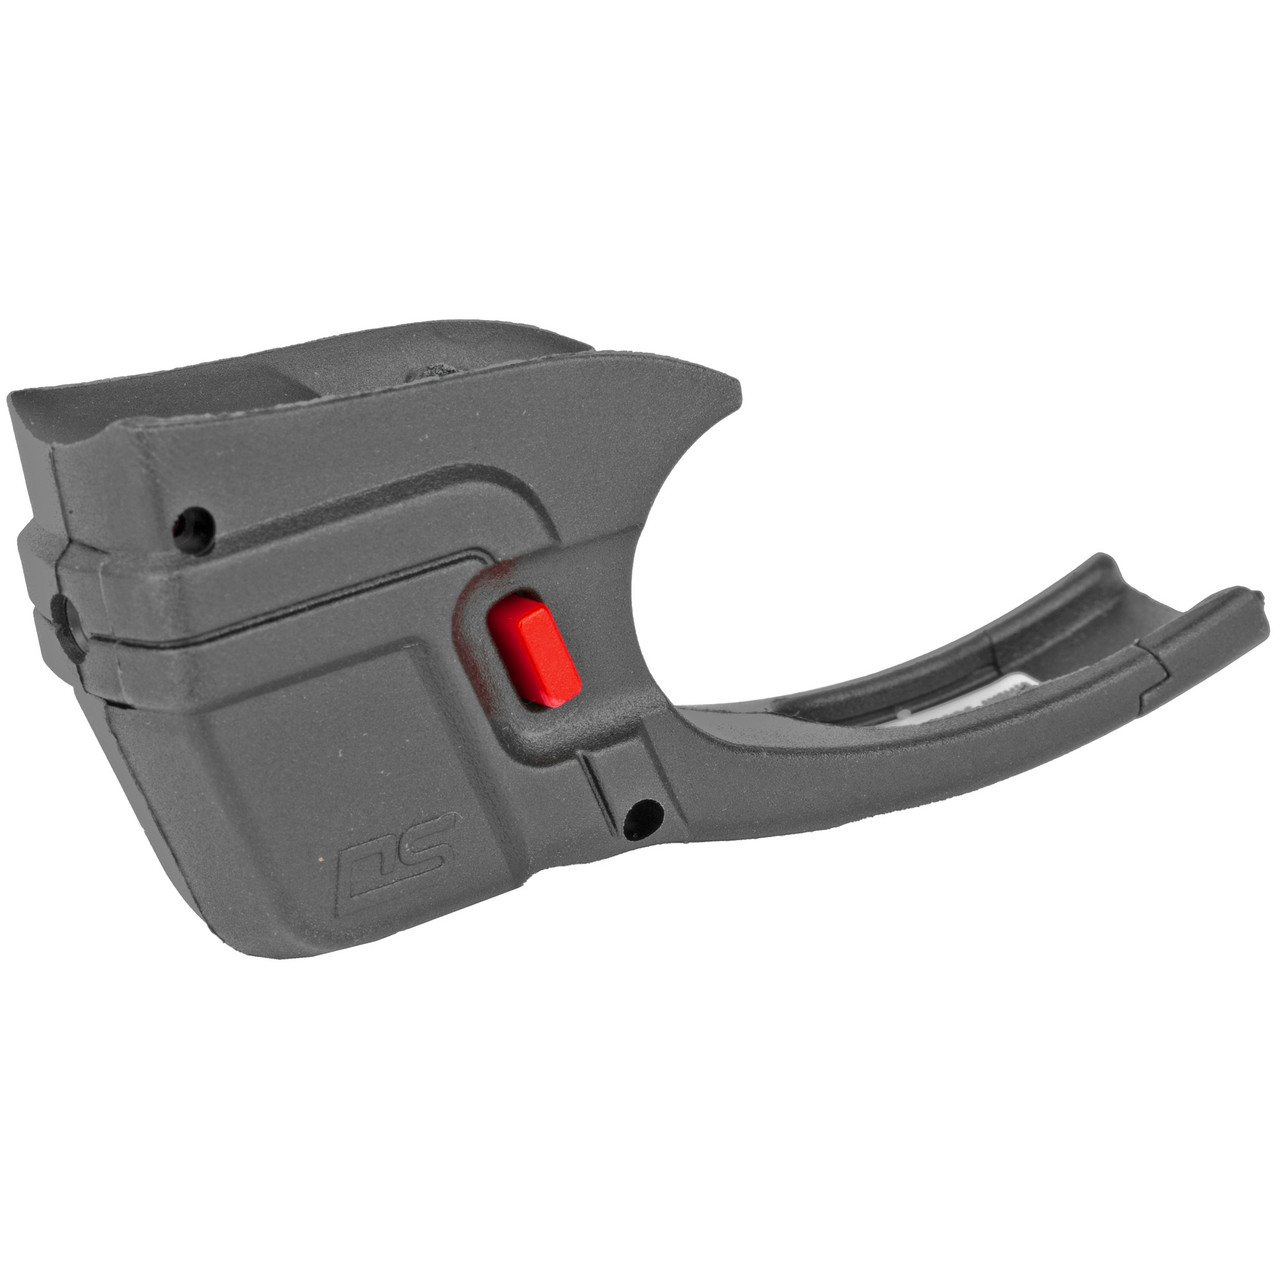 Crimson Trace Corporation DS-122 Def Ser Accu-guard Ruger Lcp